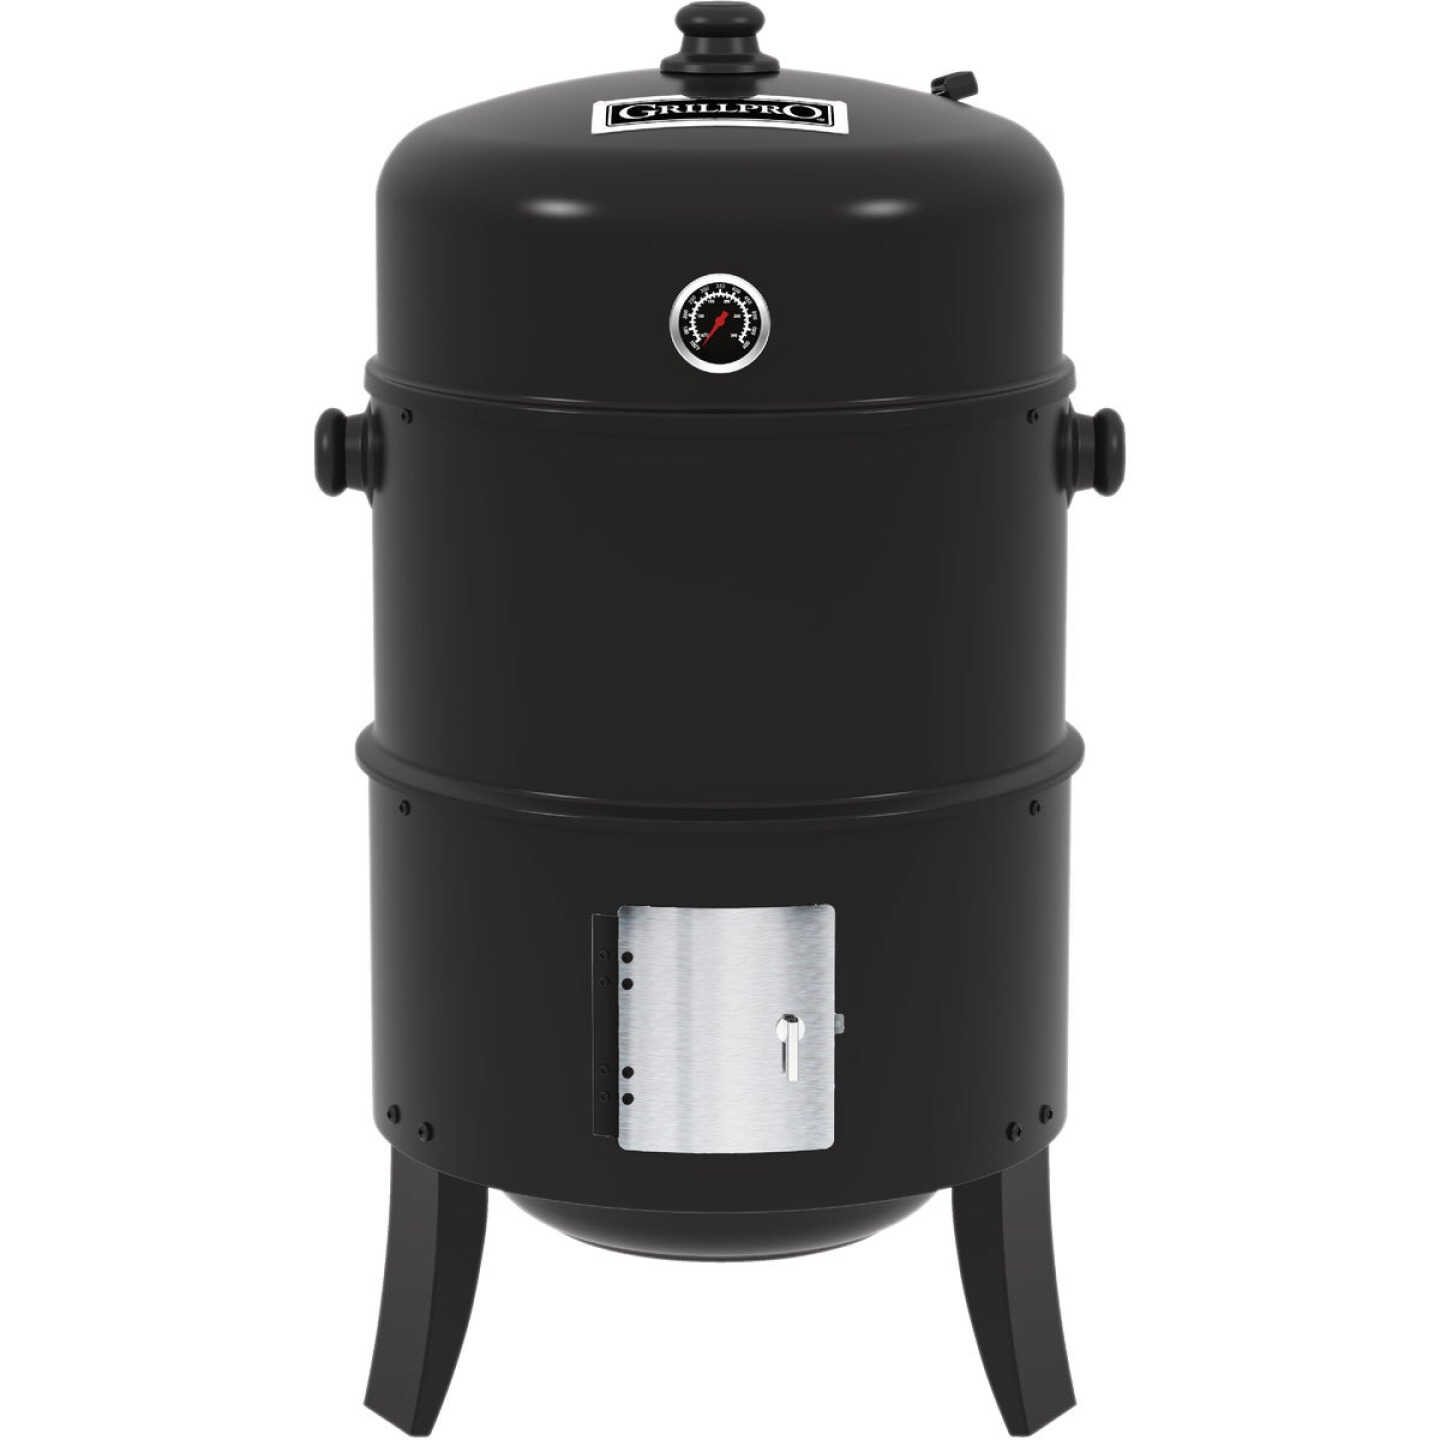 Hardware & Upright 16 Sq. Brownsboro - Traditional 400 Paint GrillPro Charcoal In. Water In. Smoker